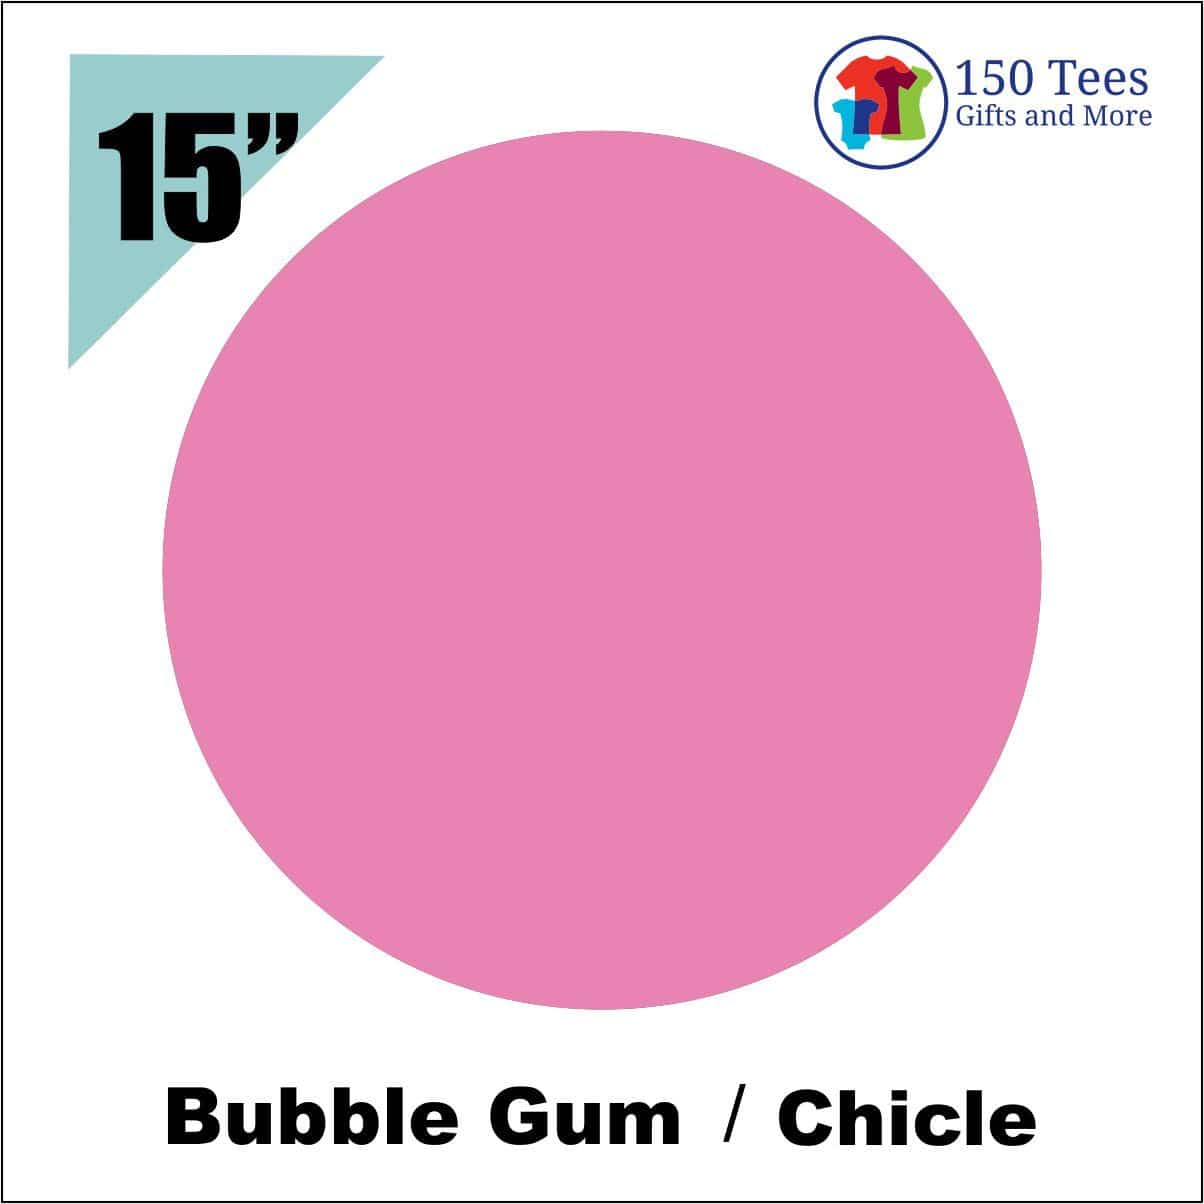 EasyWeed HTV 15" - Bubble Gum - 150 TEES GIFTS & MORE